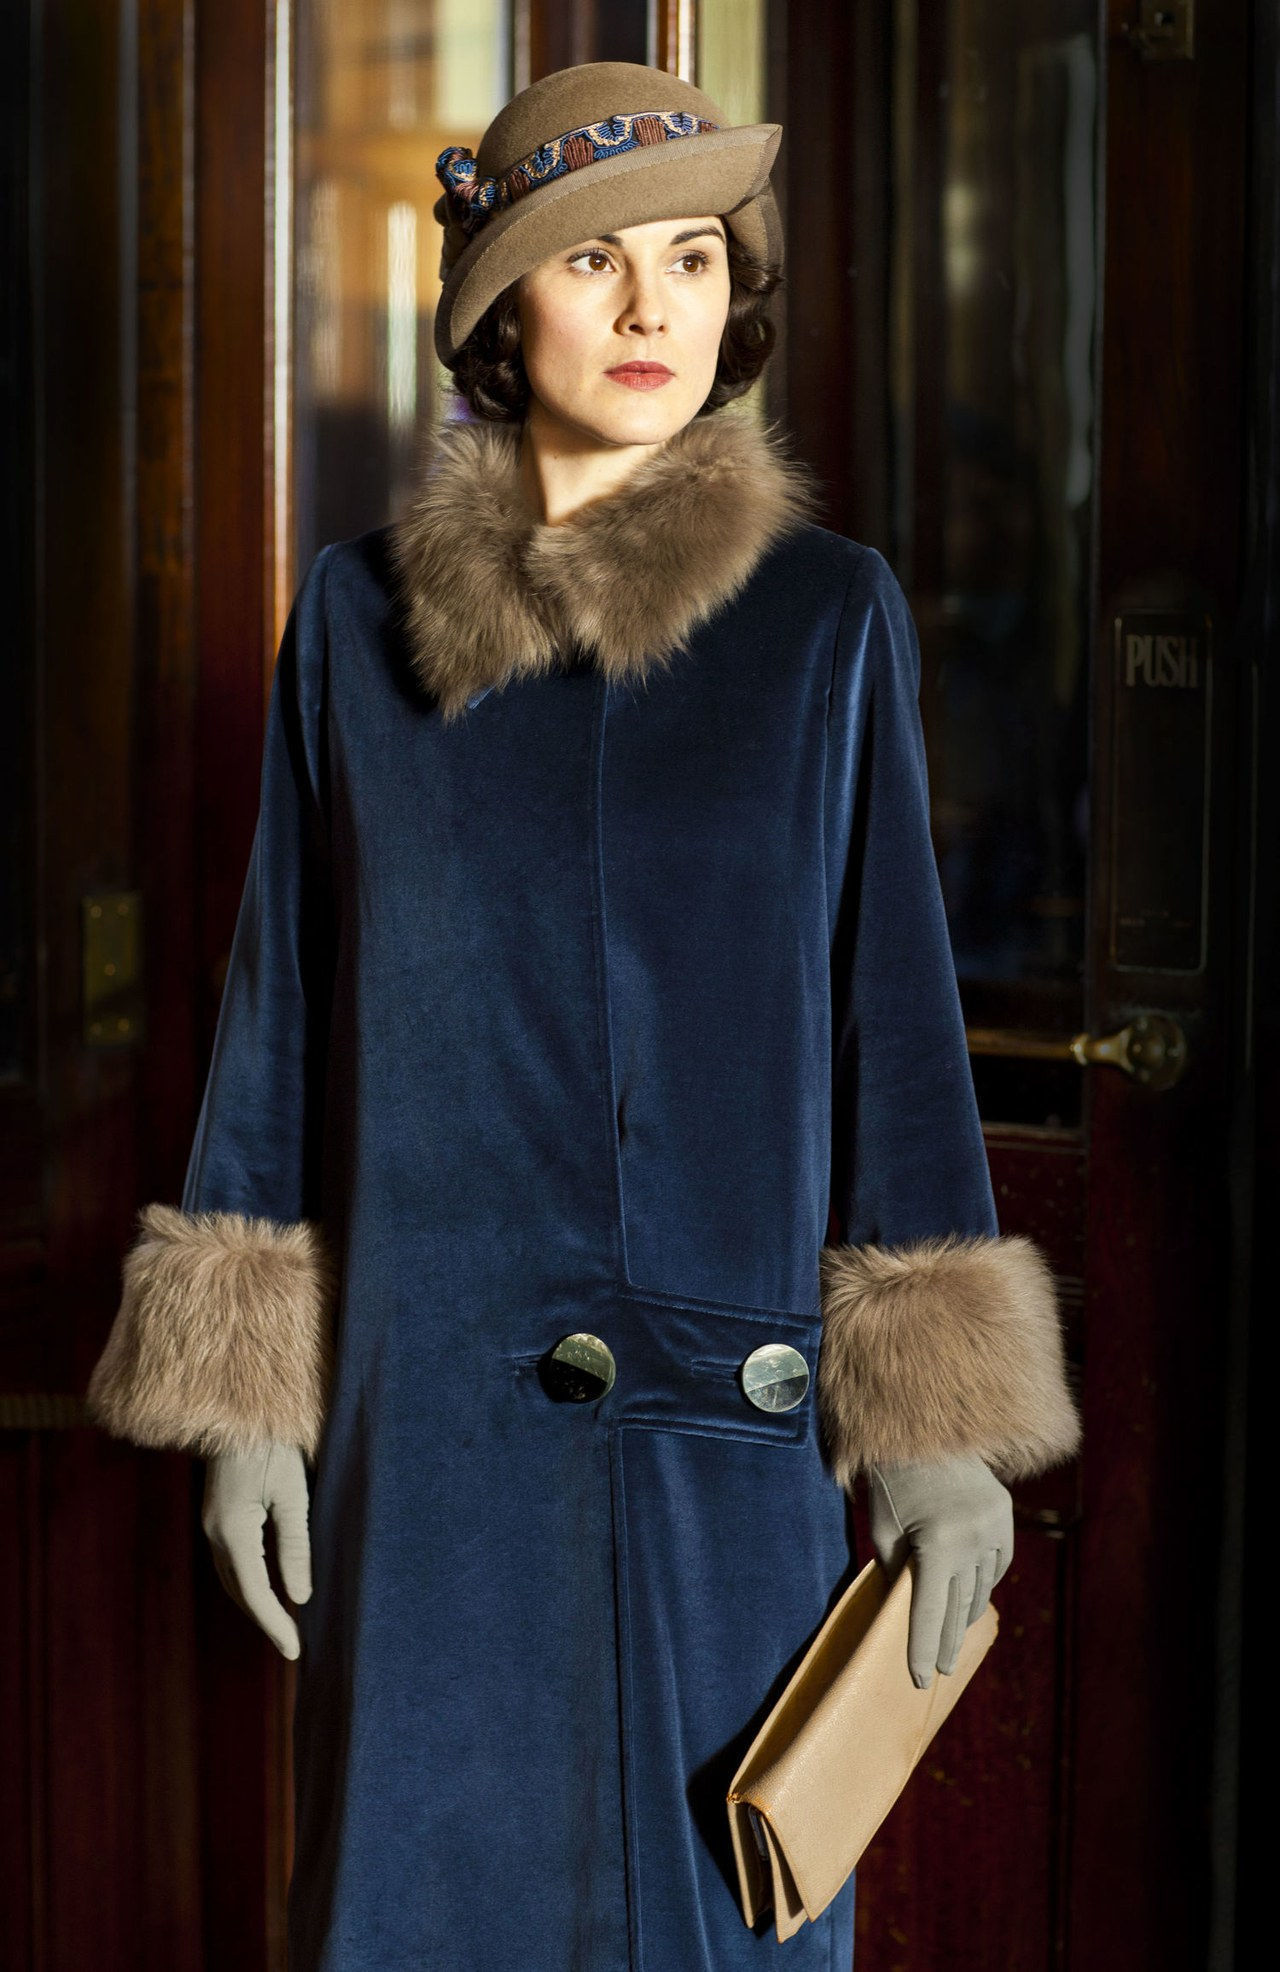 Downton abbey lady mary best looks 3